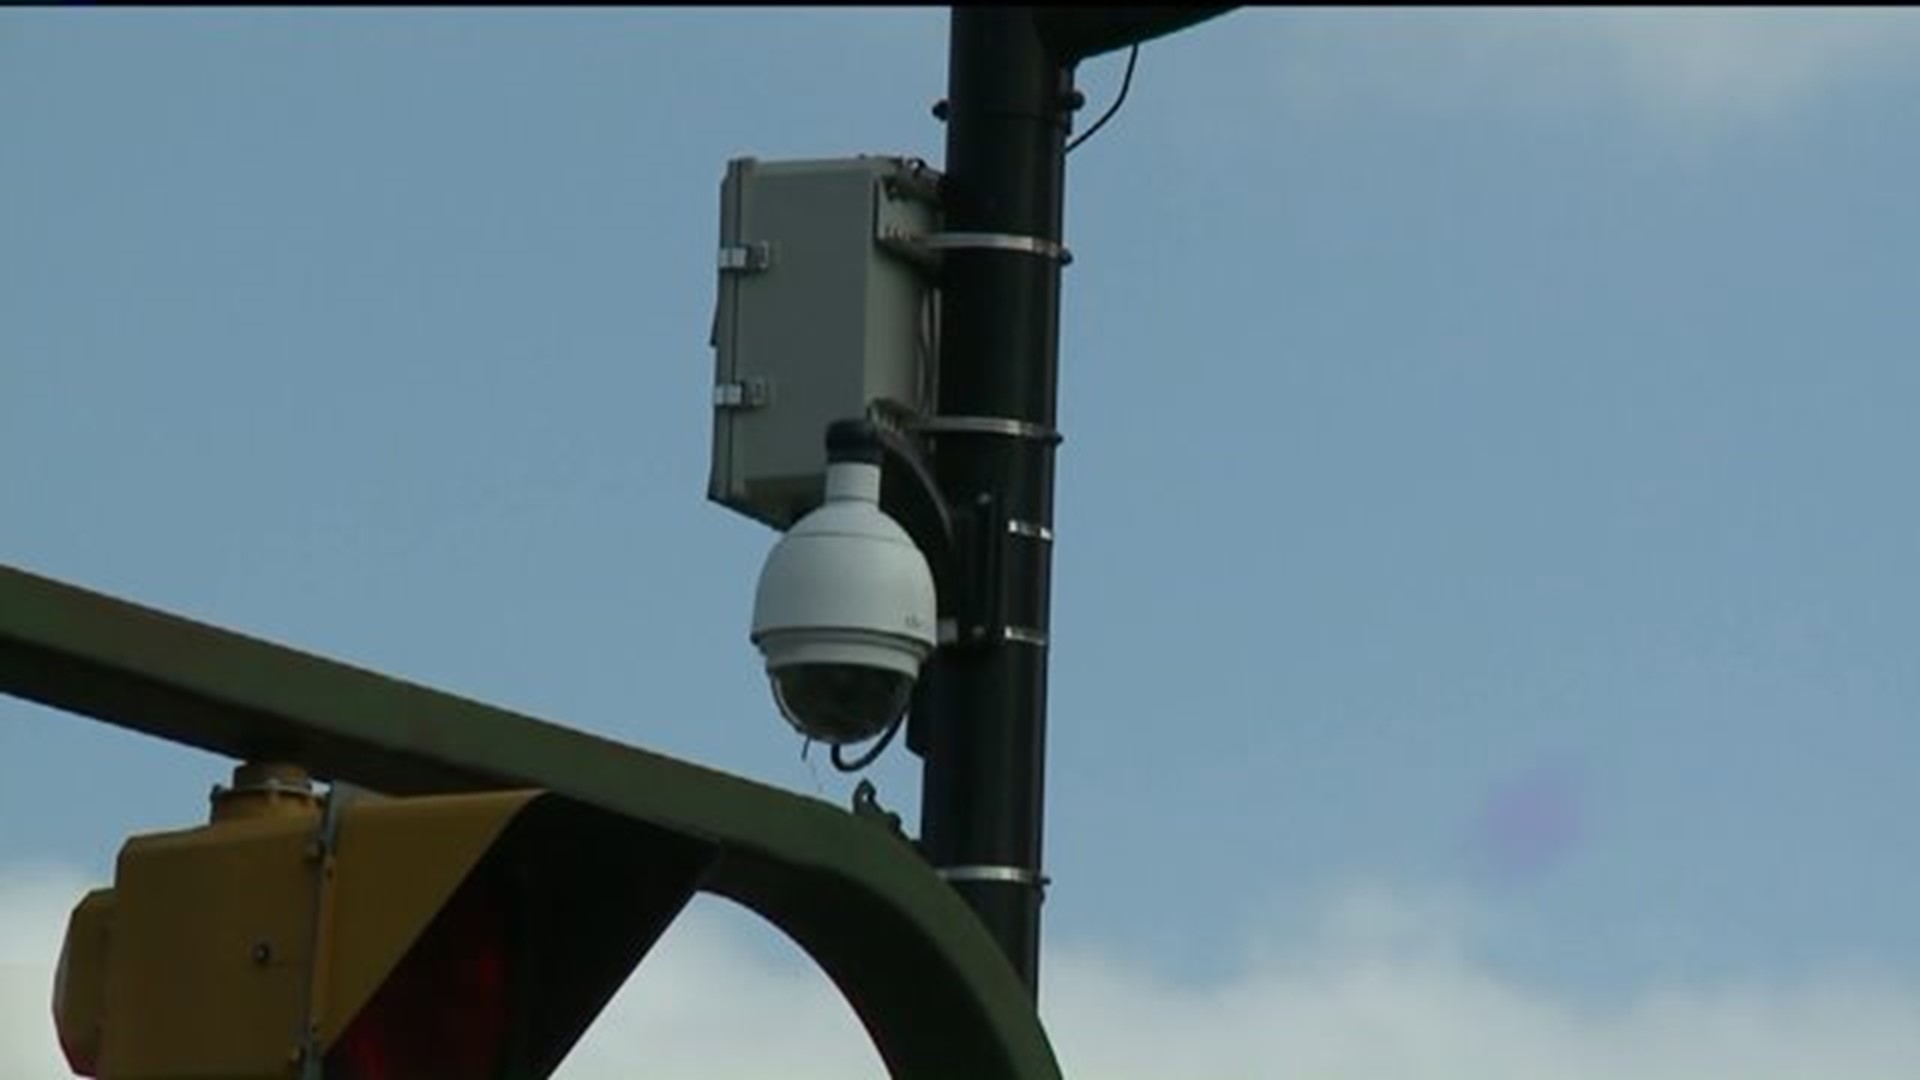 Wilkes-Barre City Considering Changes to Camera System